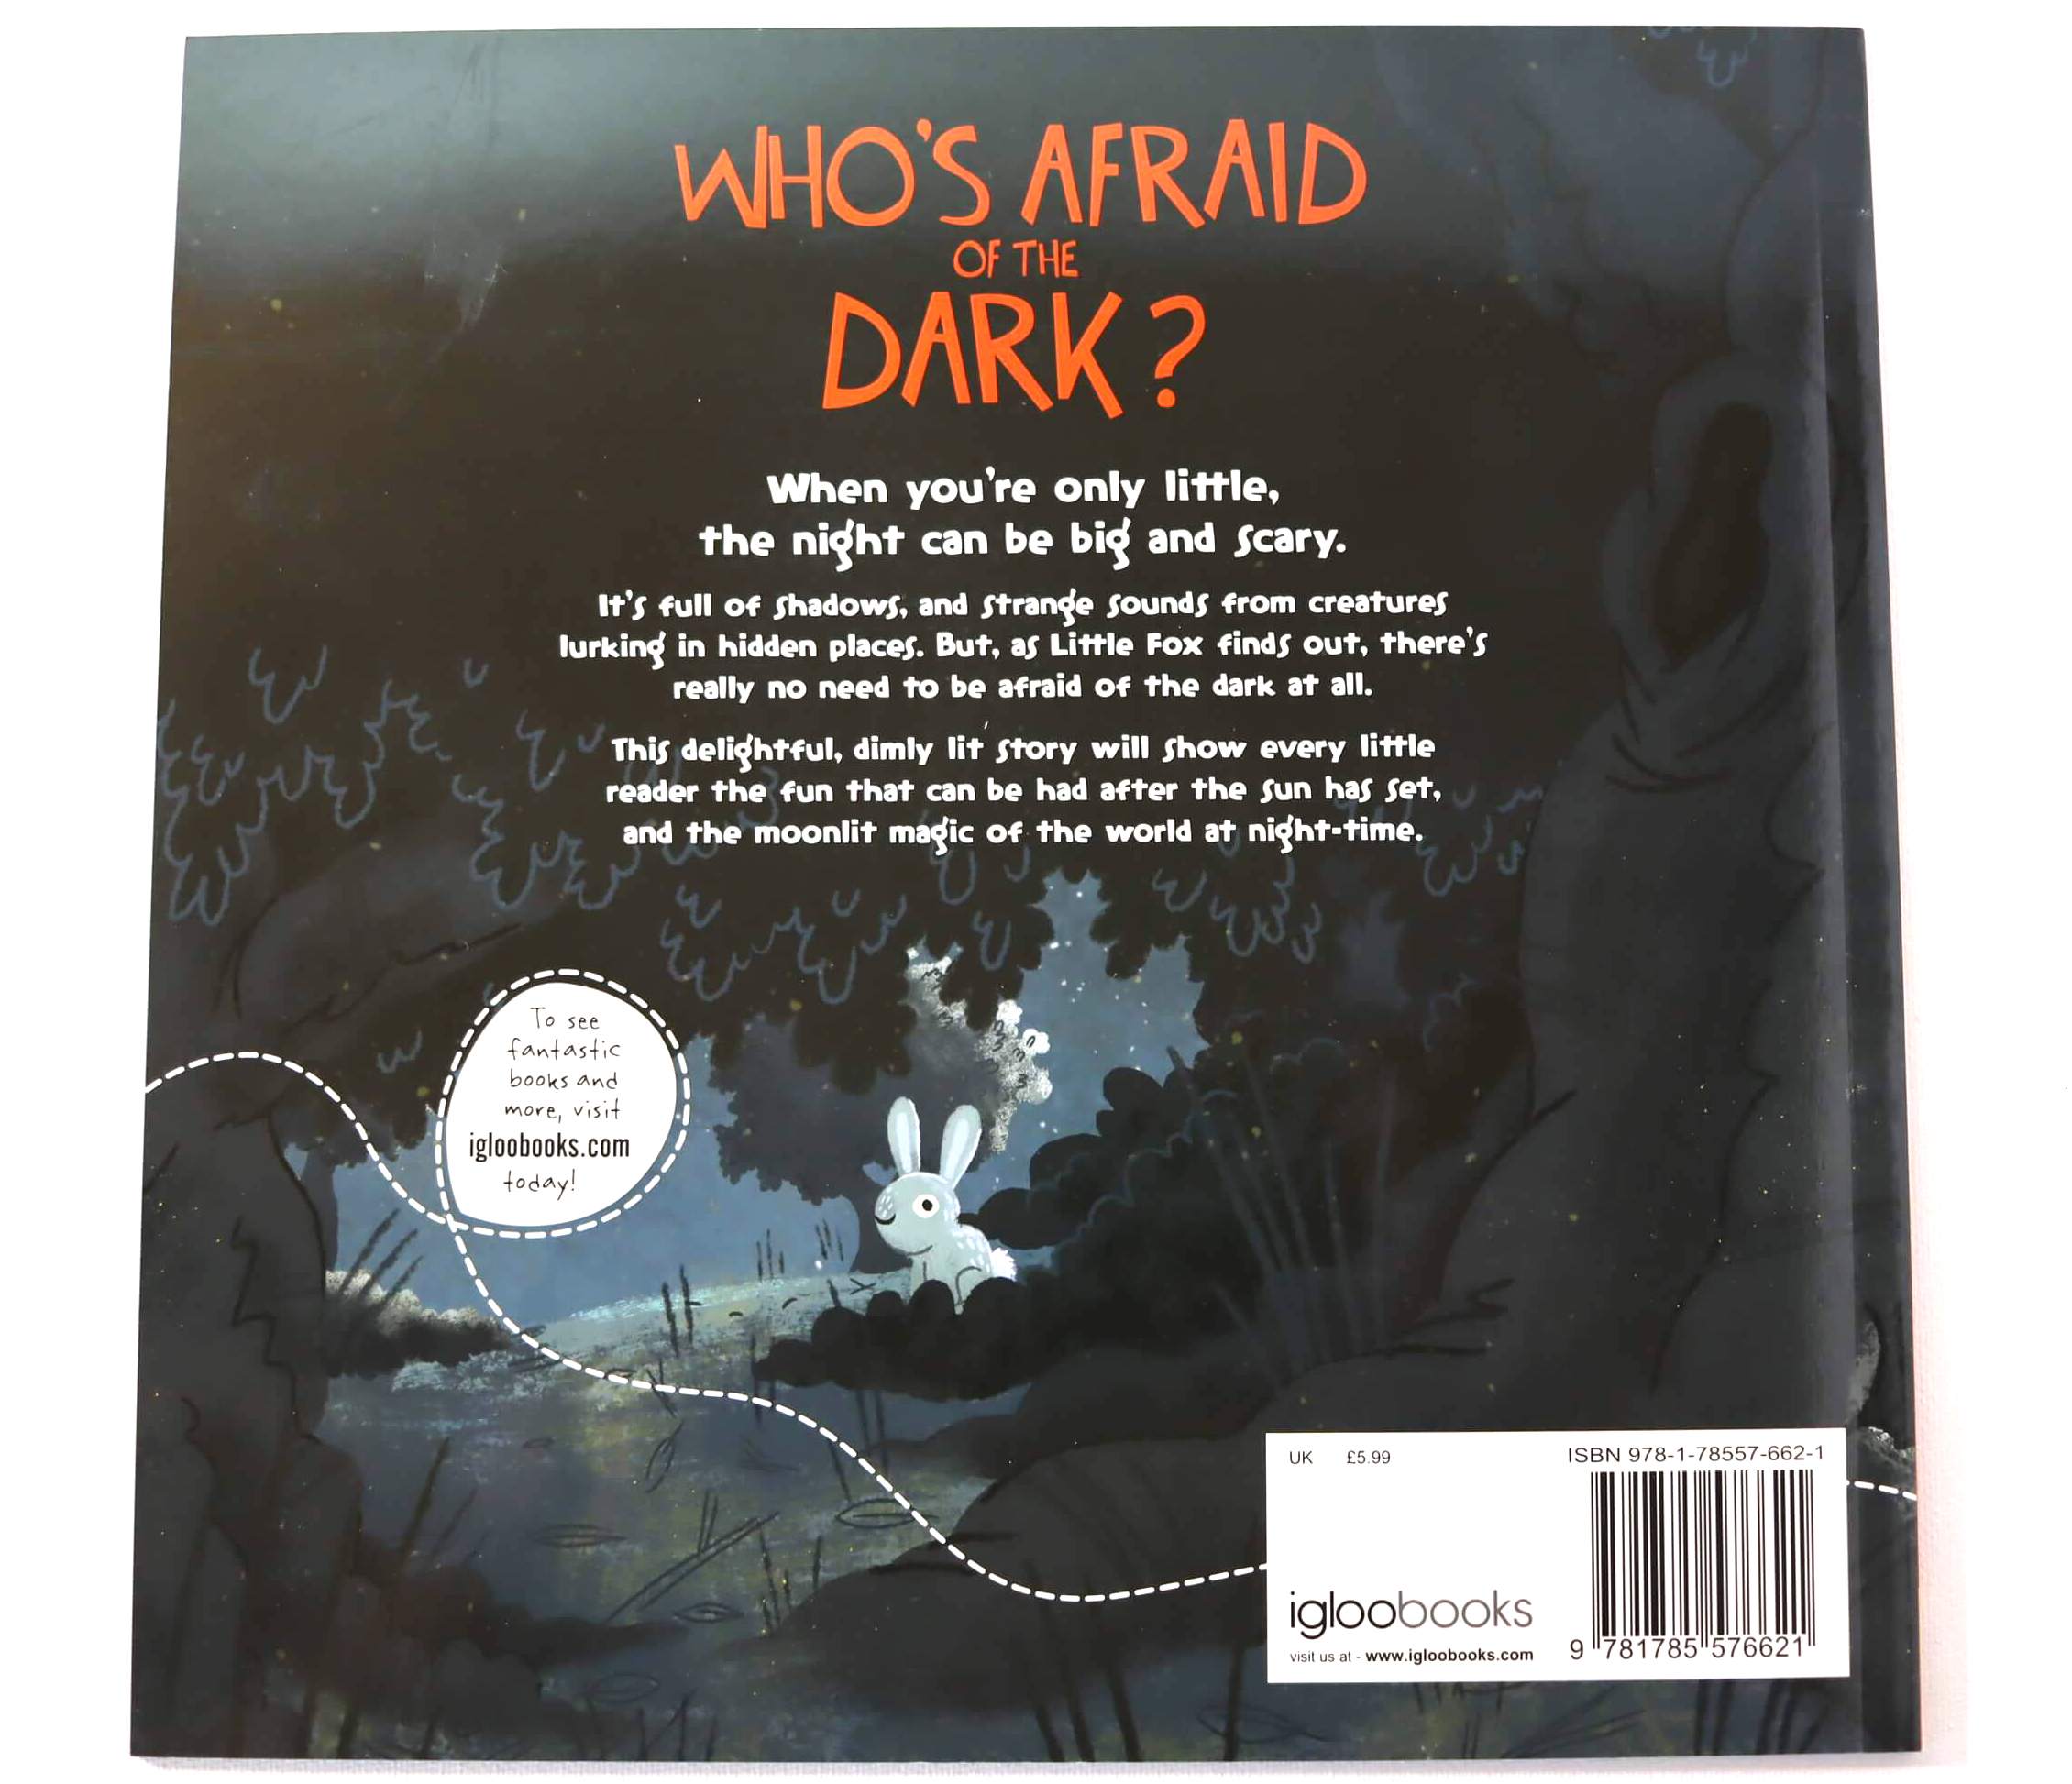 EnglishCentral - Are you afraid of the dark and other things that